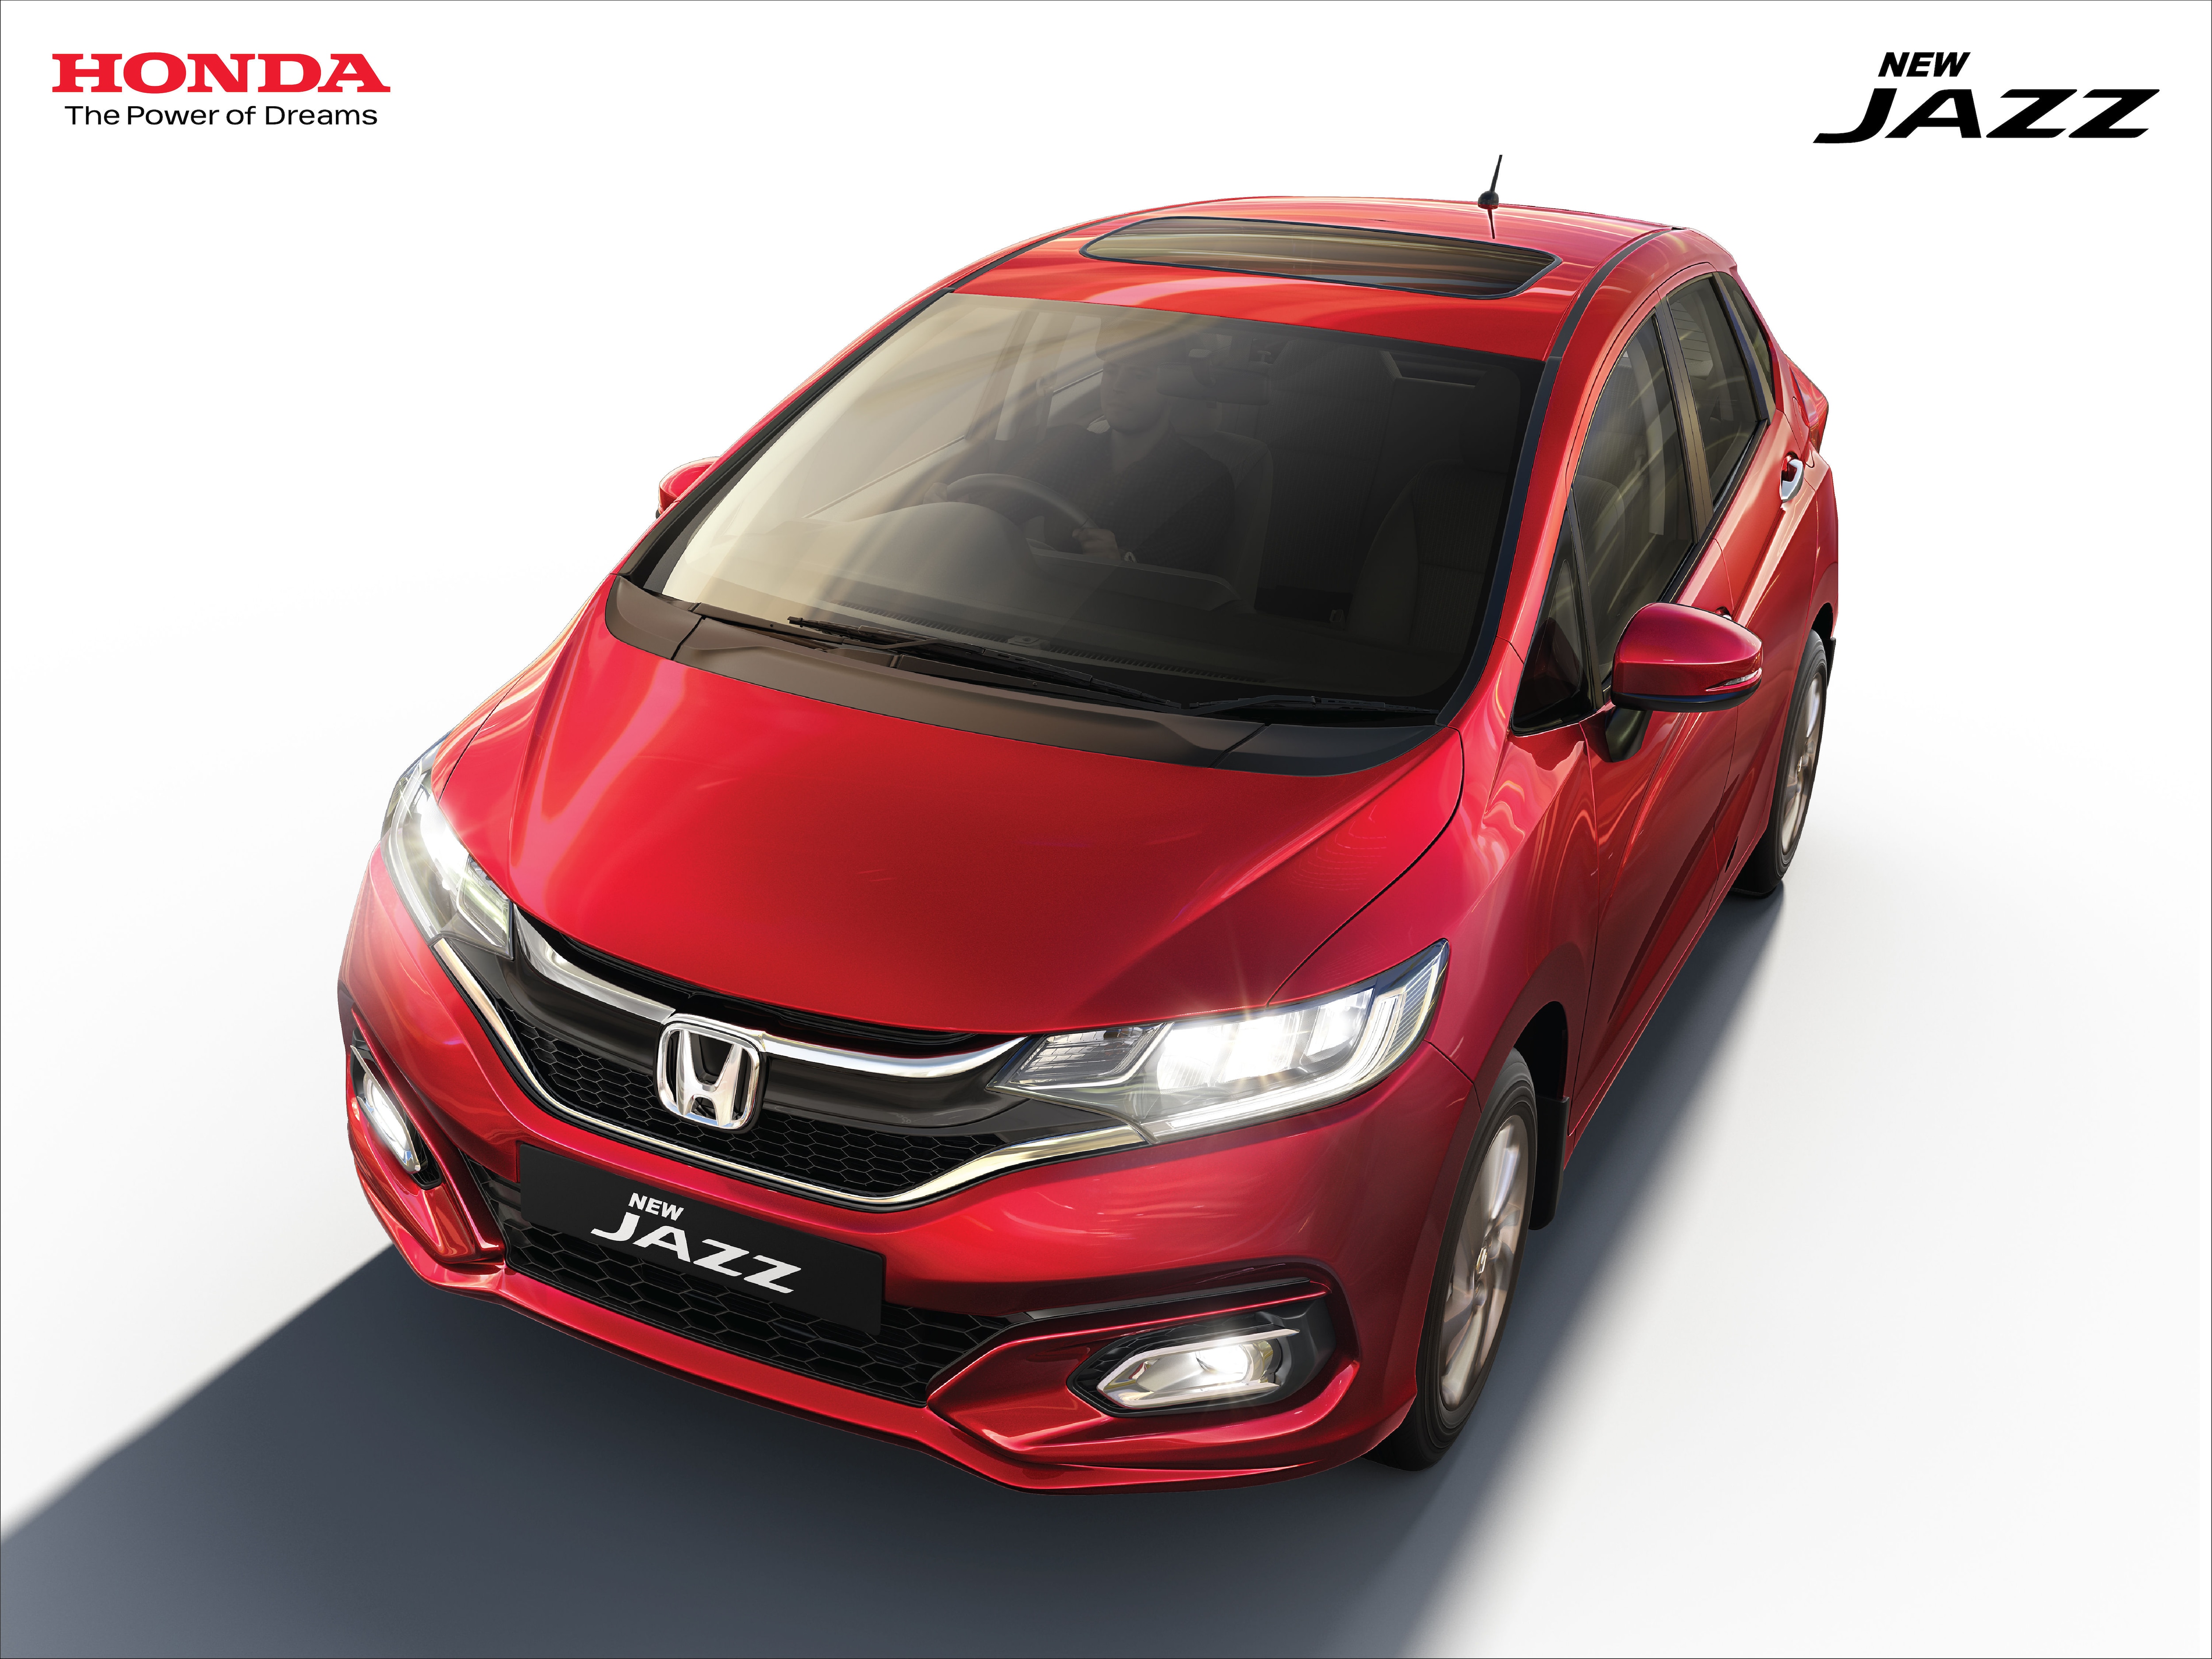 The new Jazz from Honda gets several design updates on the outside,